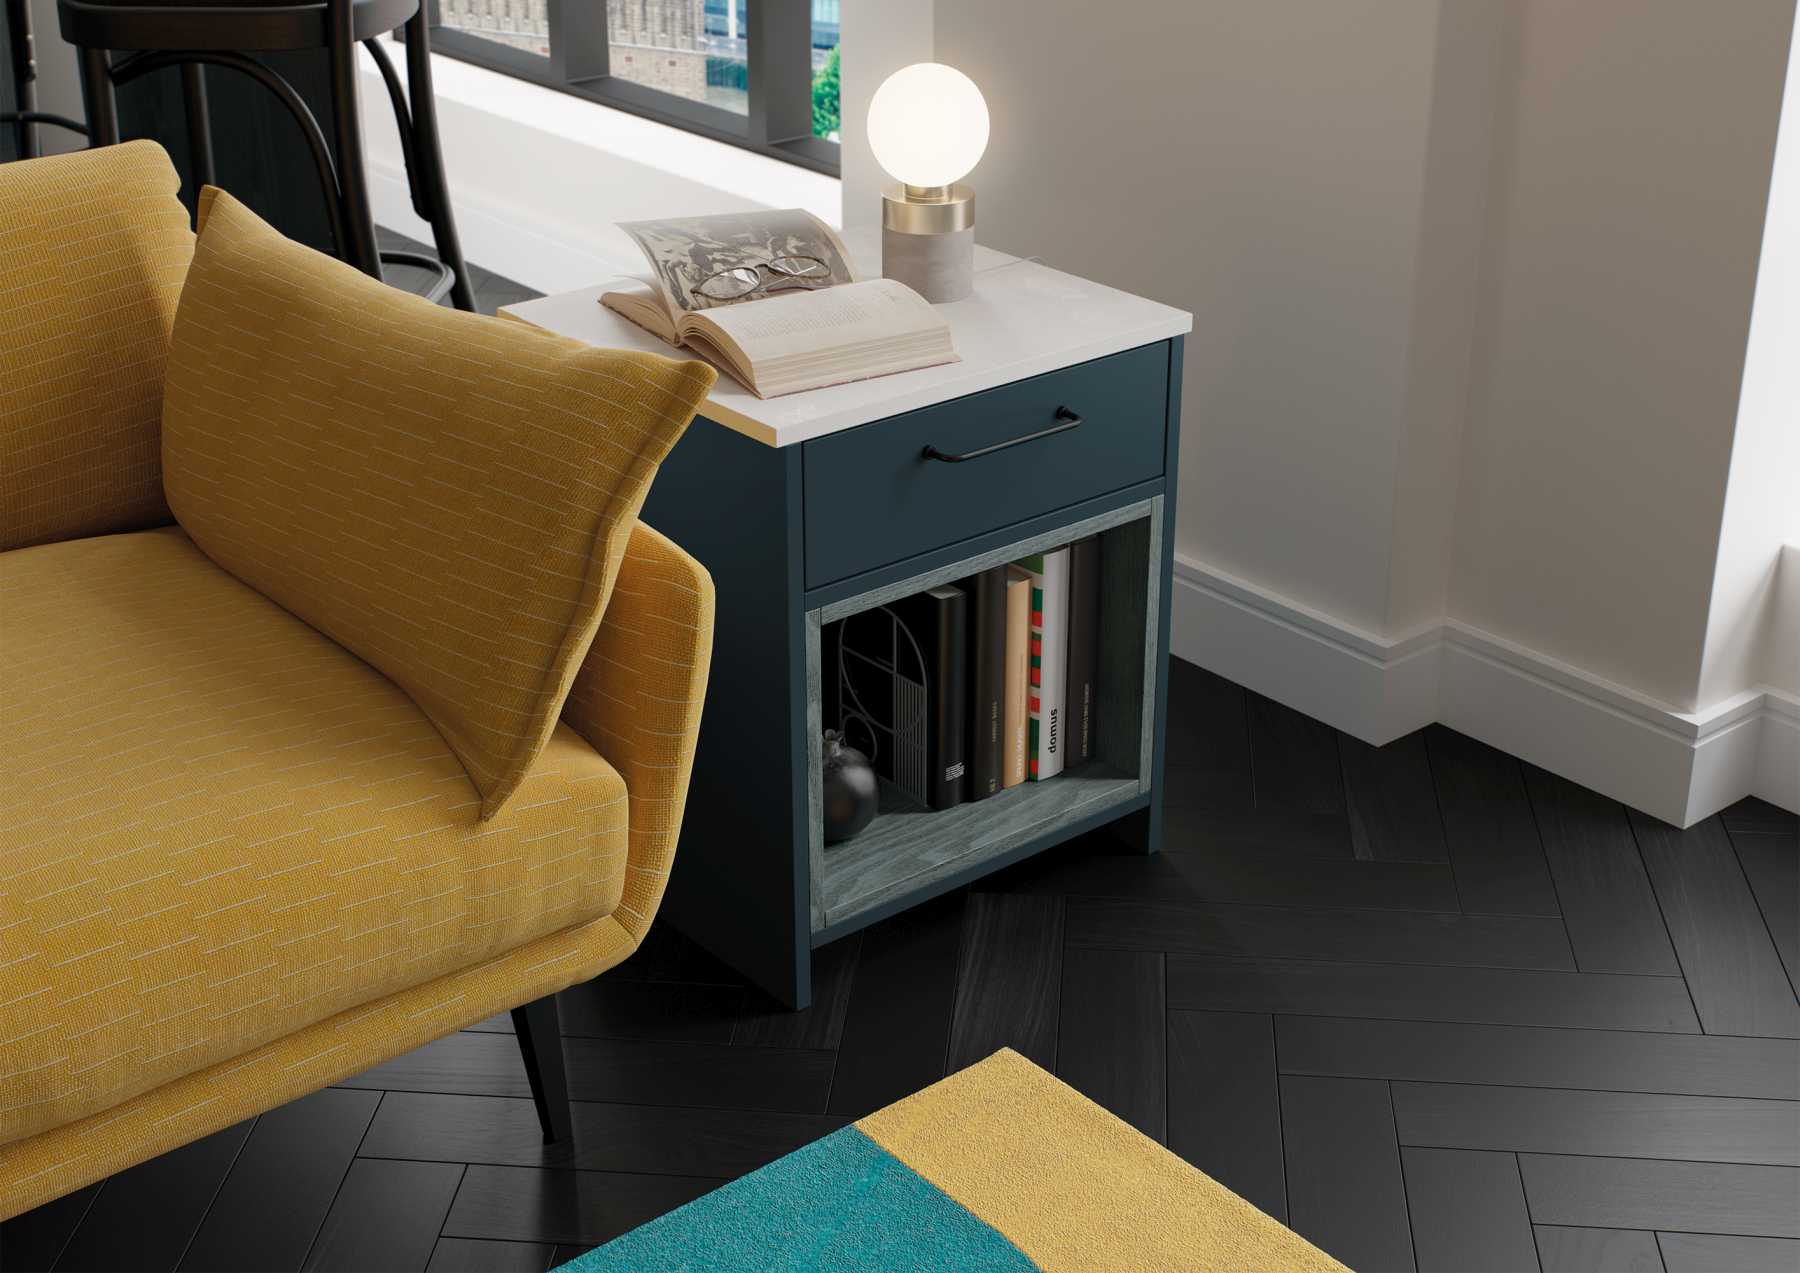 Lounge side table in matte marine blue with stained blue woodgrain shelf and quartz top